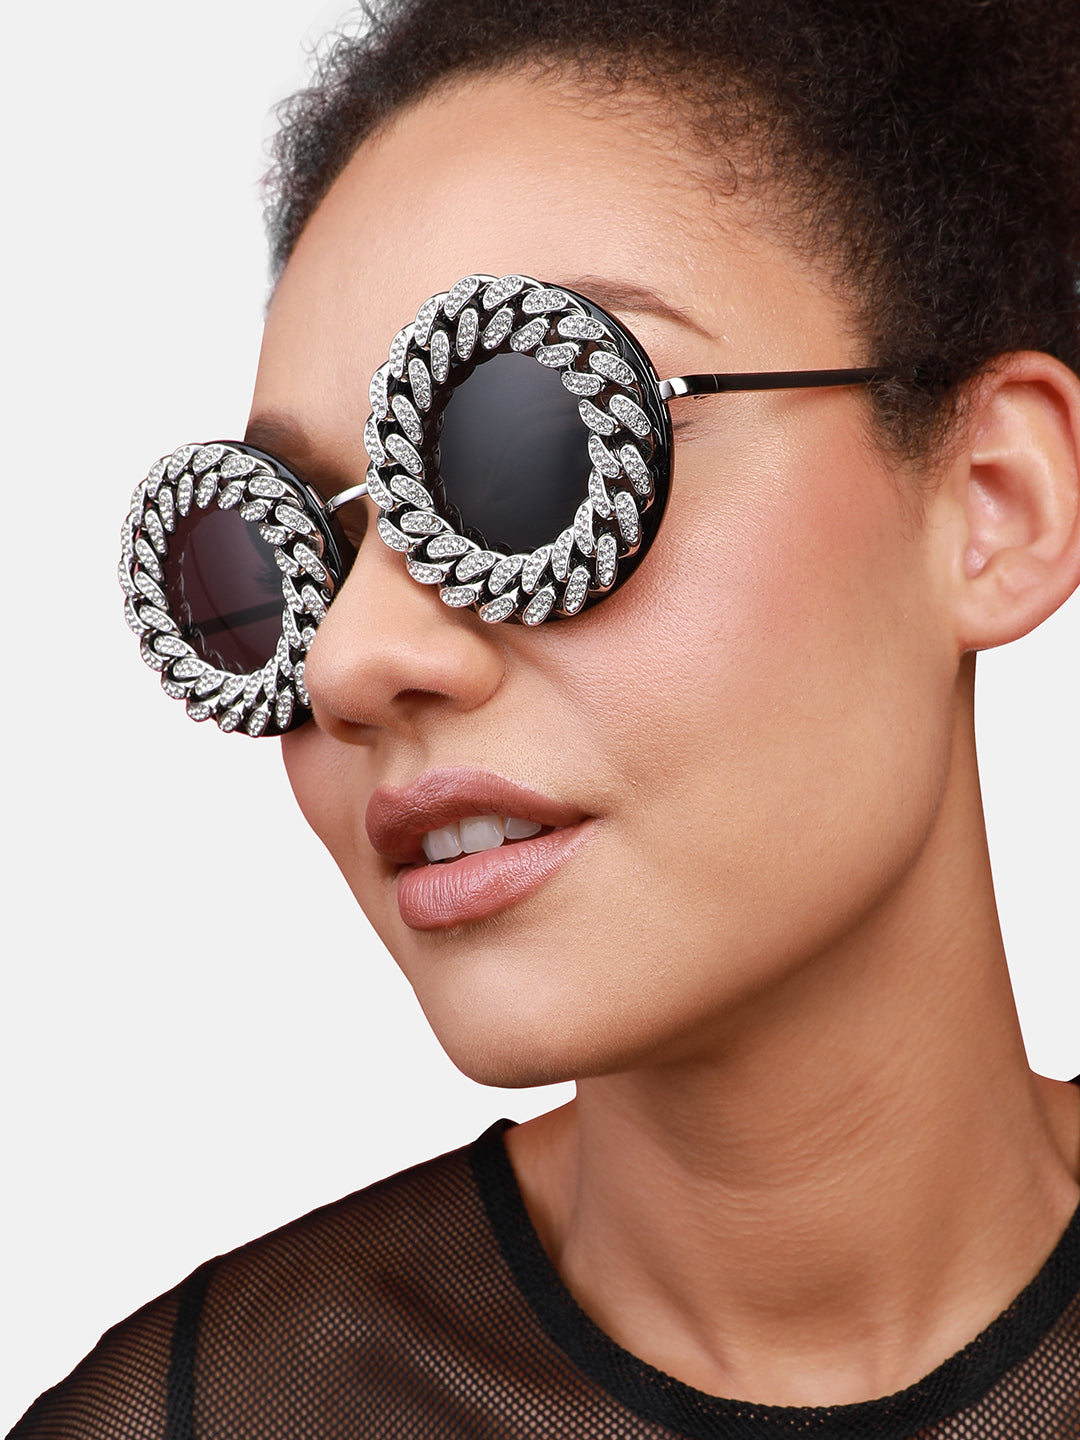 Chic Bling Shades: Elevate Your Style